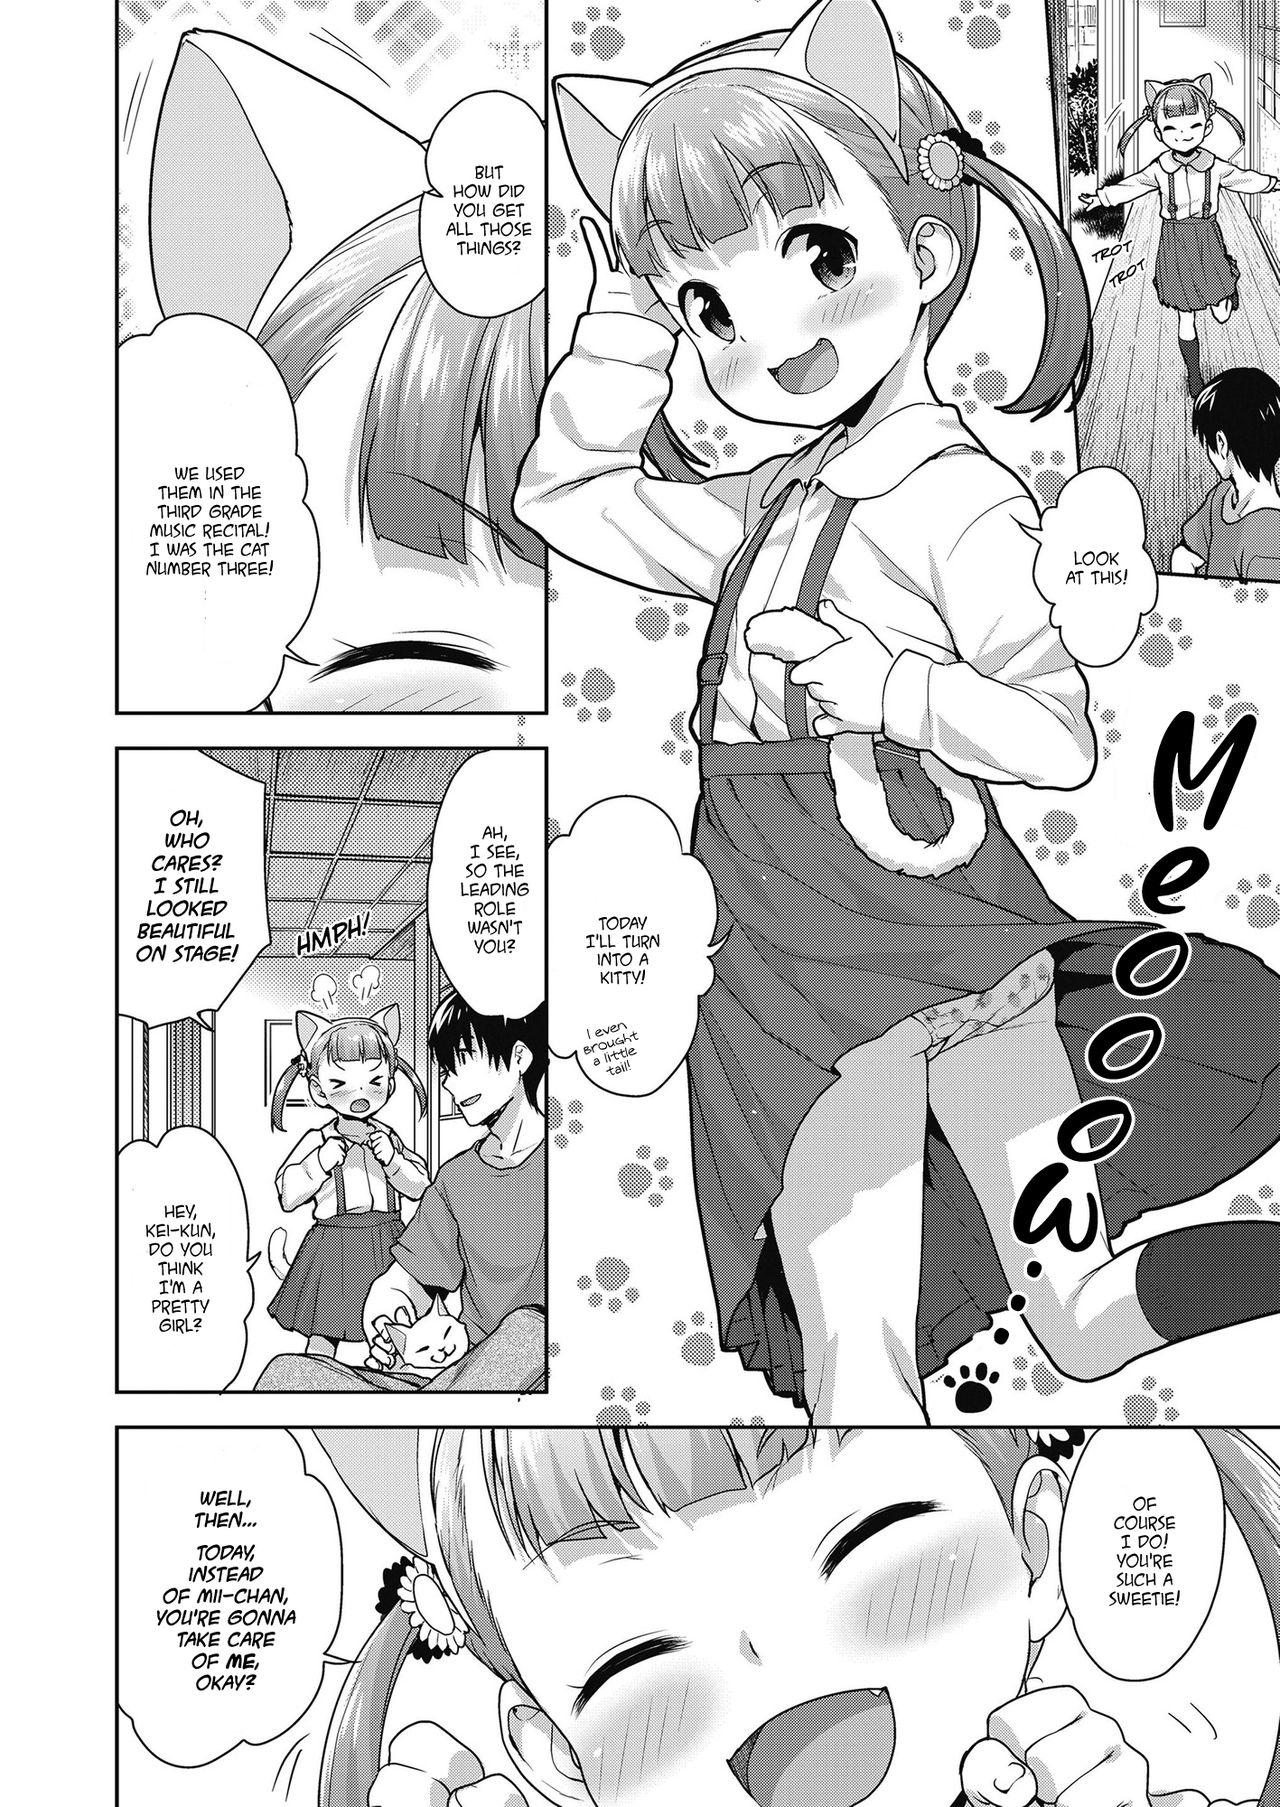 Cheating Wife Koneko no Tsubomi | The Blooming of the Kitty Clothed Sex - Page 2